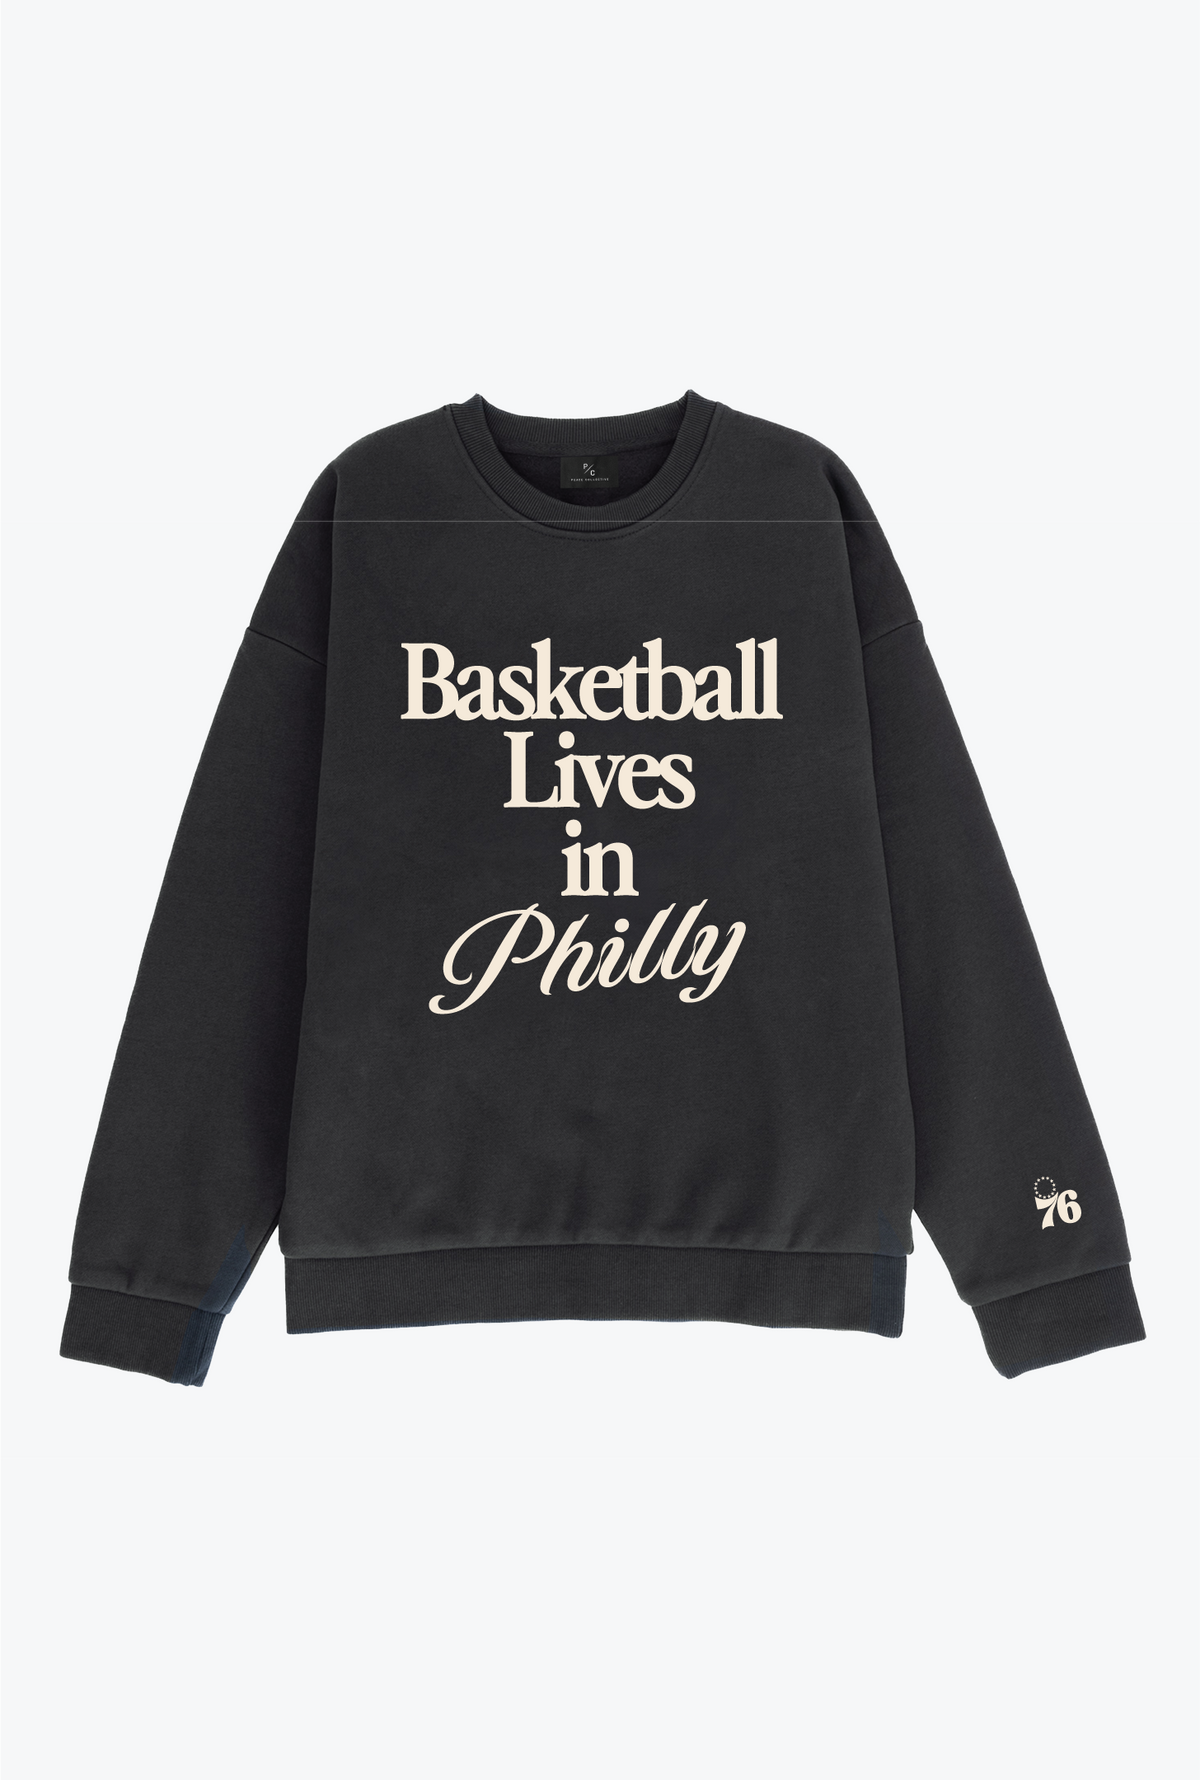 Basketball Live in Philly Super Heavy Crewneck - Off Black